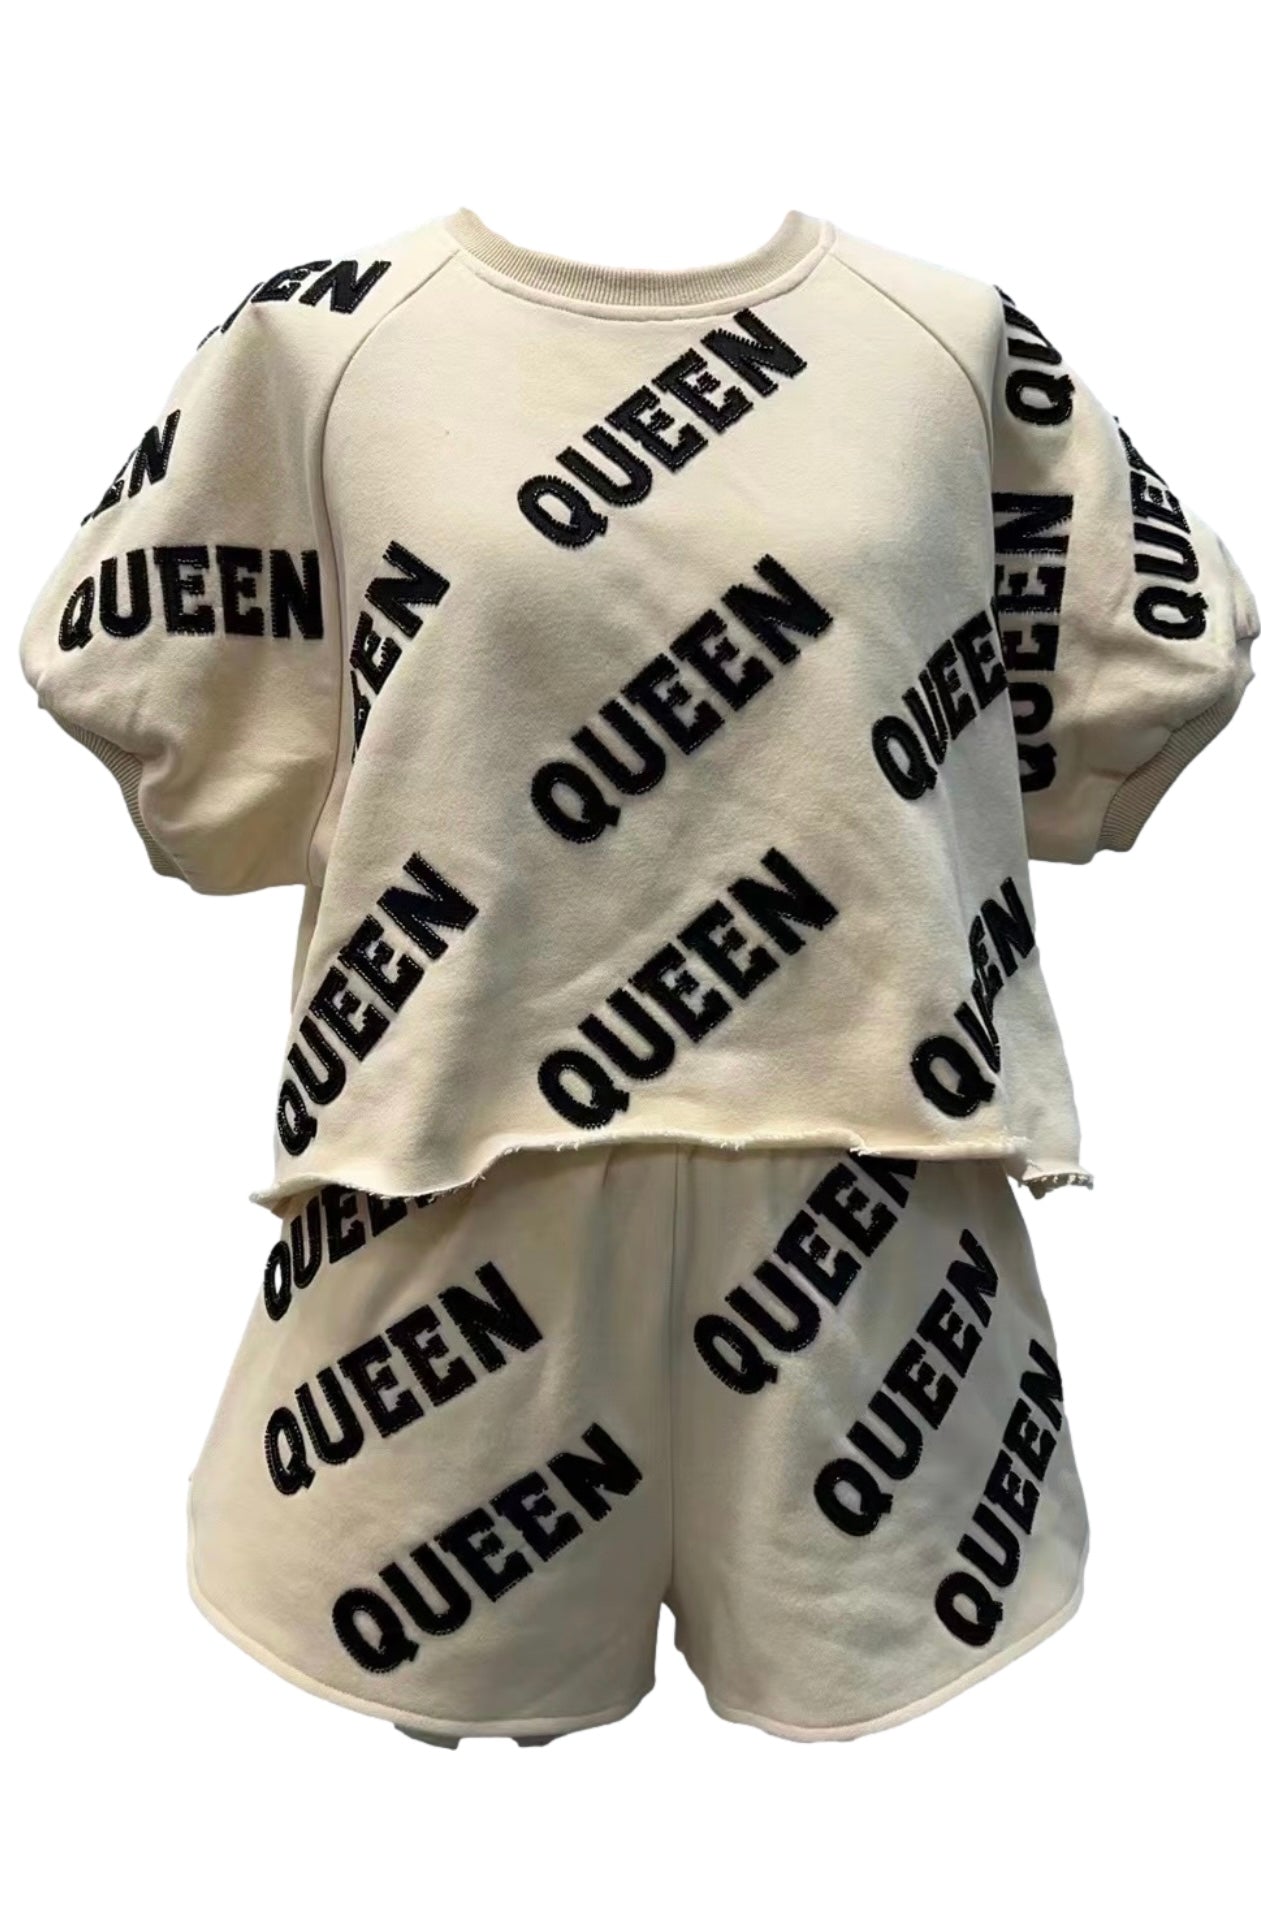 Queen all over shorts